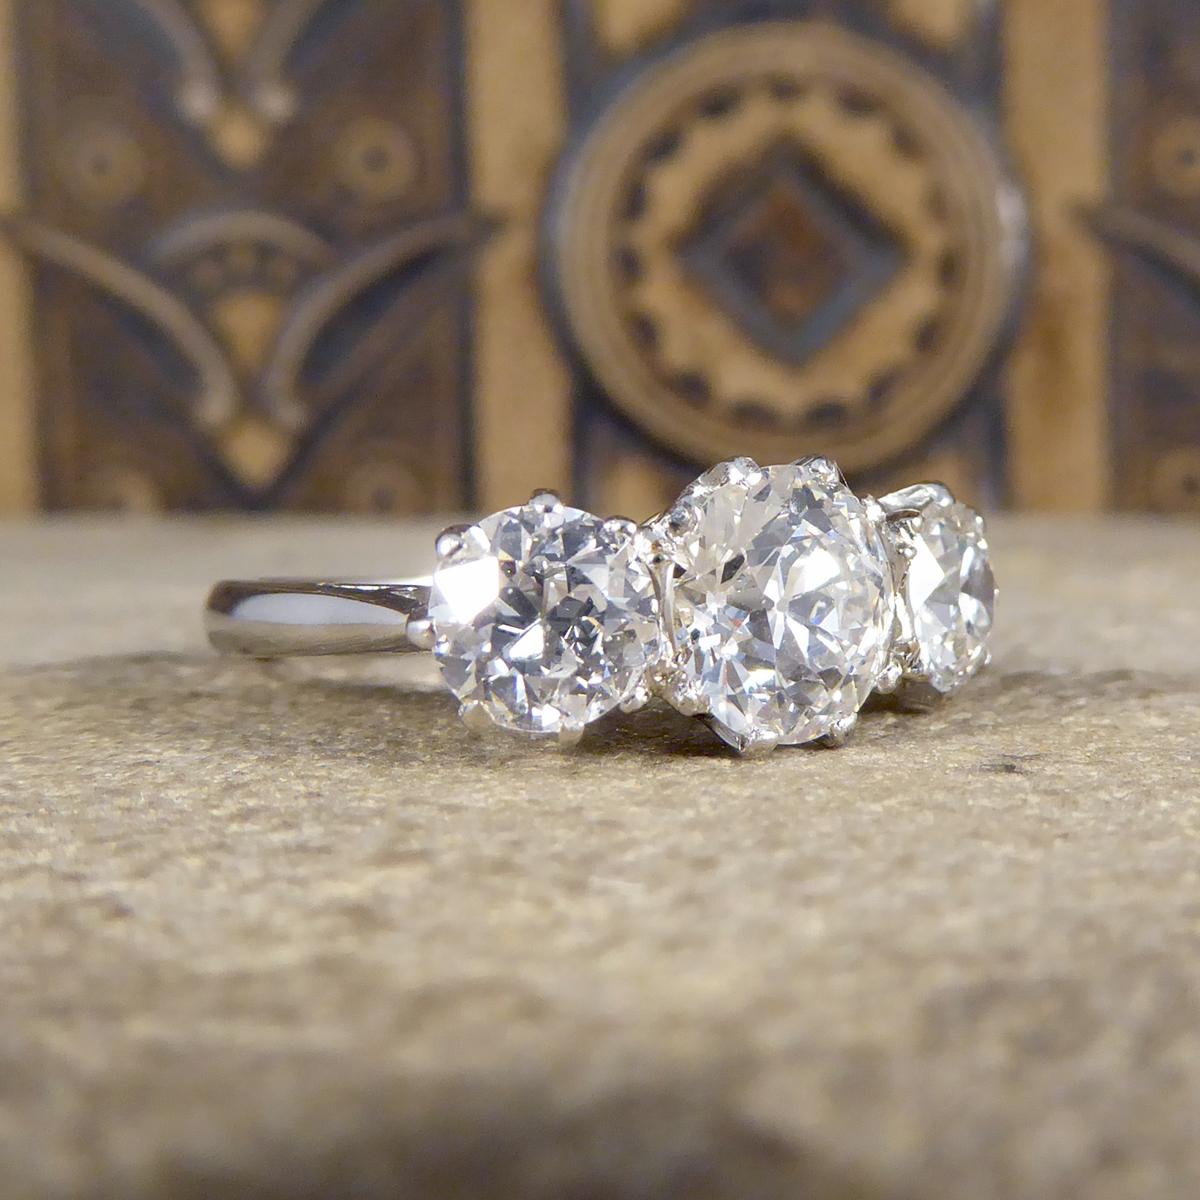 This gorgeous three stone or trilogy Diamond ring holds Old European Cut Diamonds in a contemporary setting. The trilogy diamond ring became a very popular style in the 1920/30's demonstrating how this style stands the test of time. Set in onto an